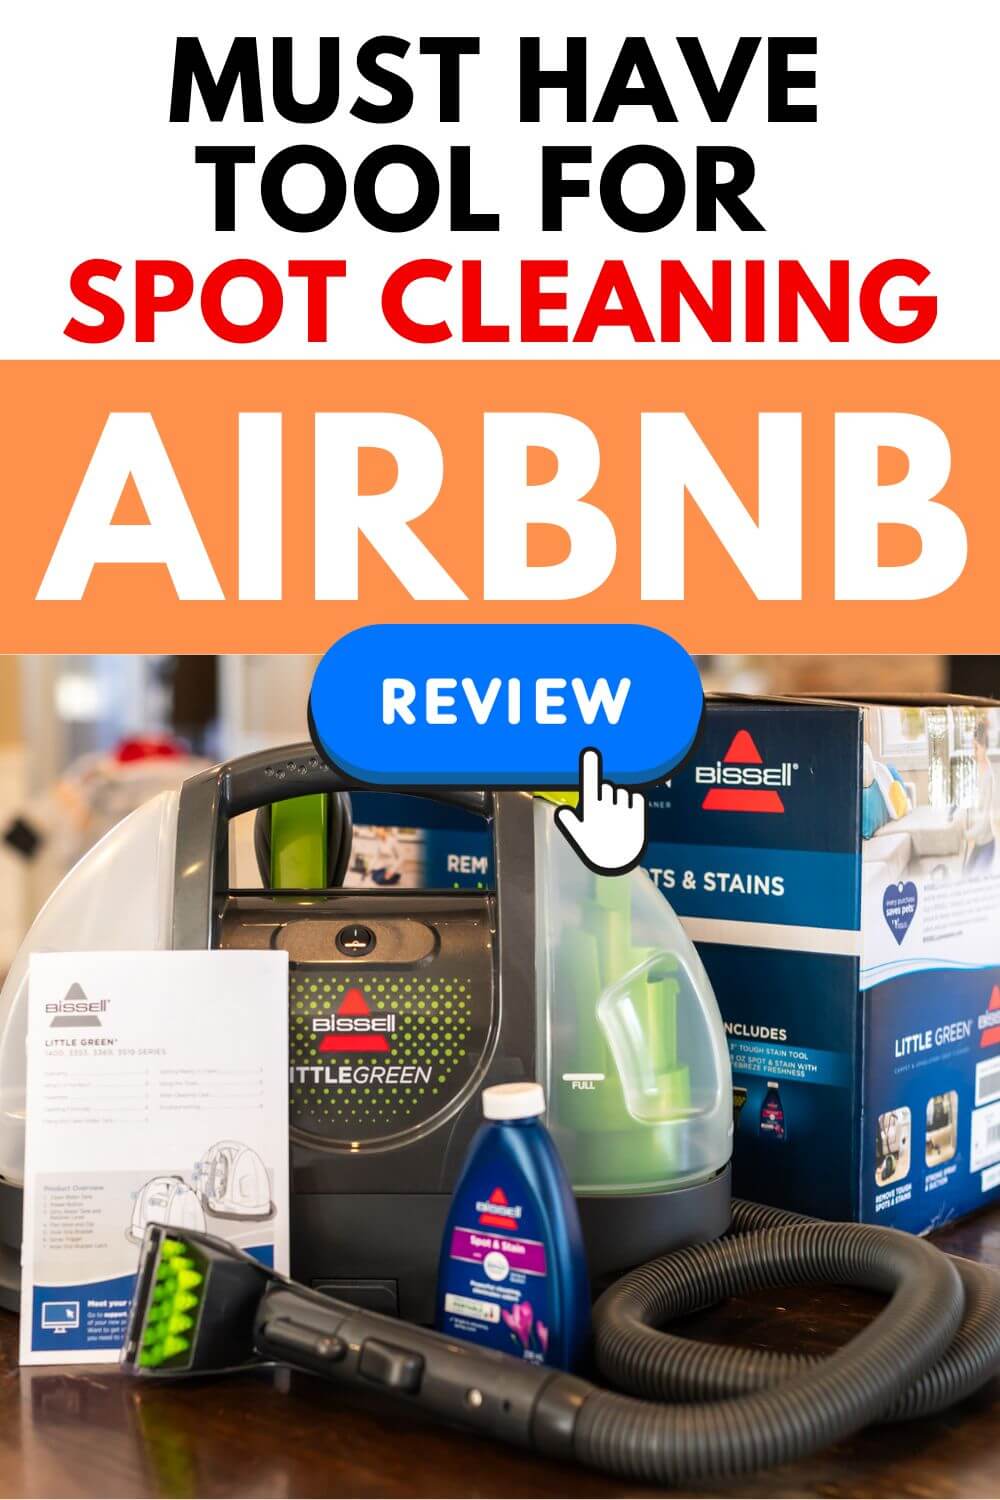 Best Upholstery Cleaner Portable Bissell Little Green Airbnb Review